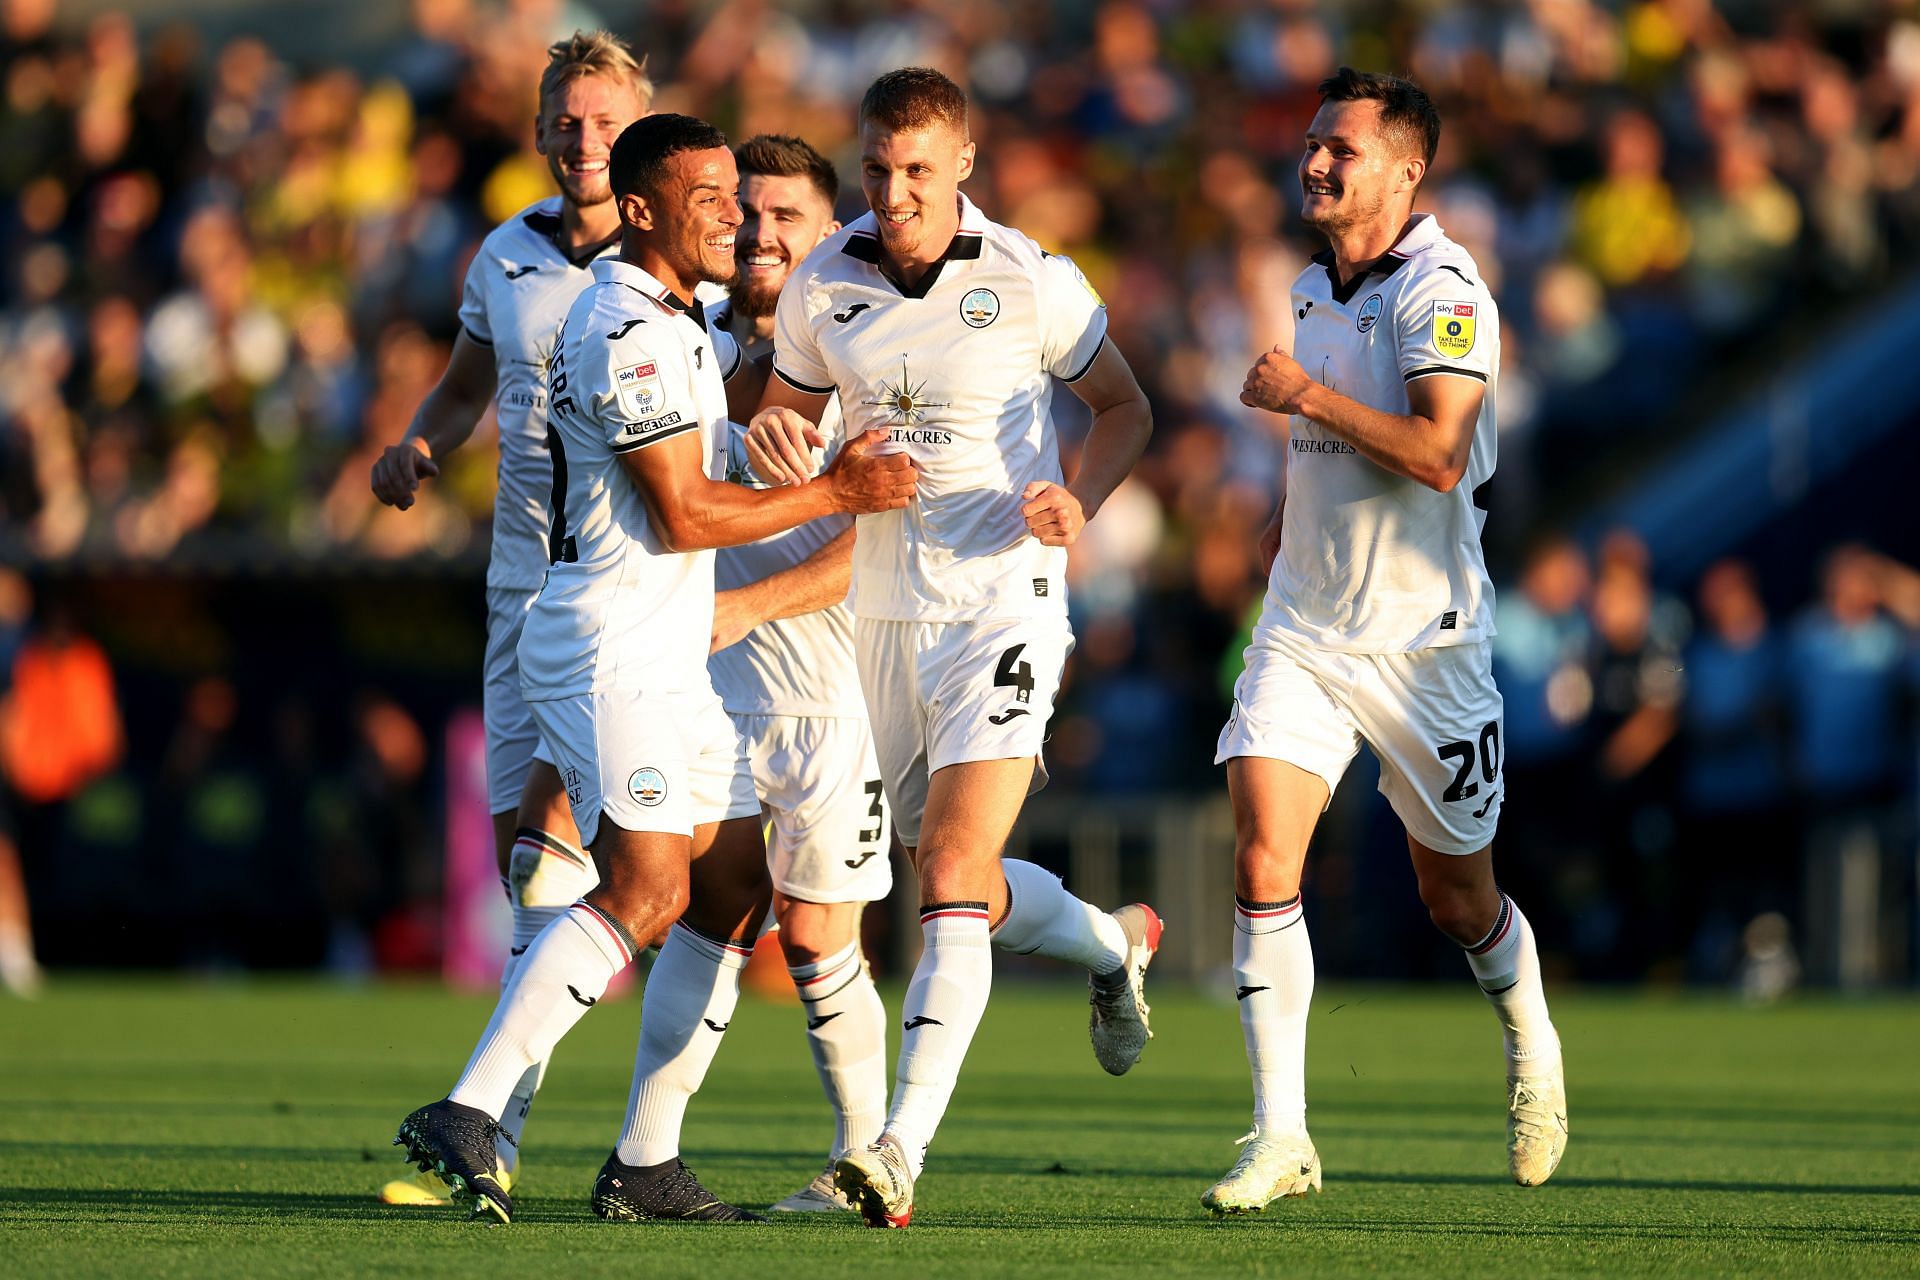 Swansea are looking for their first win of the season